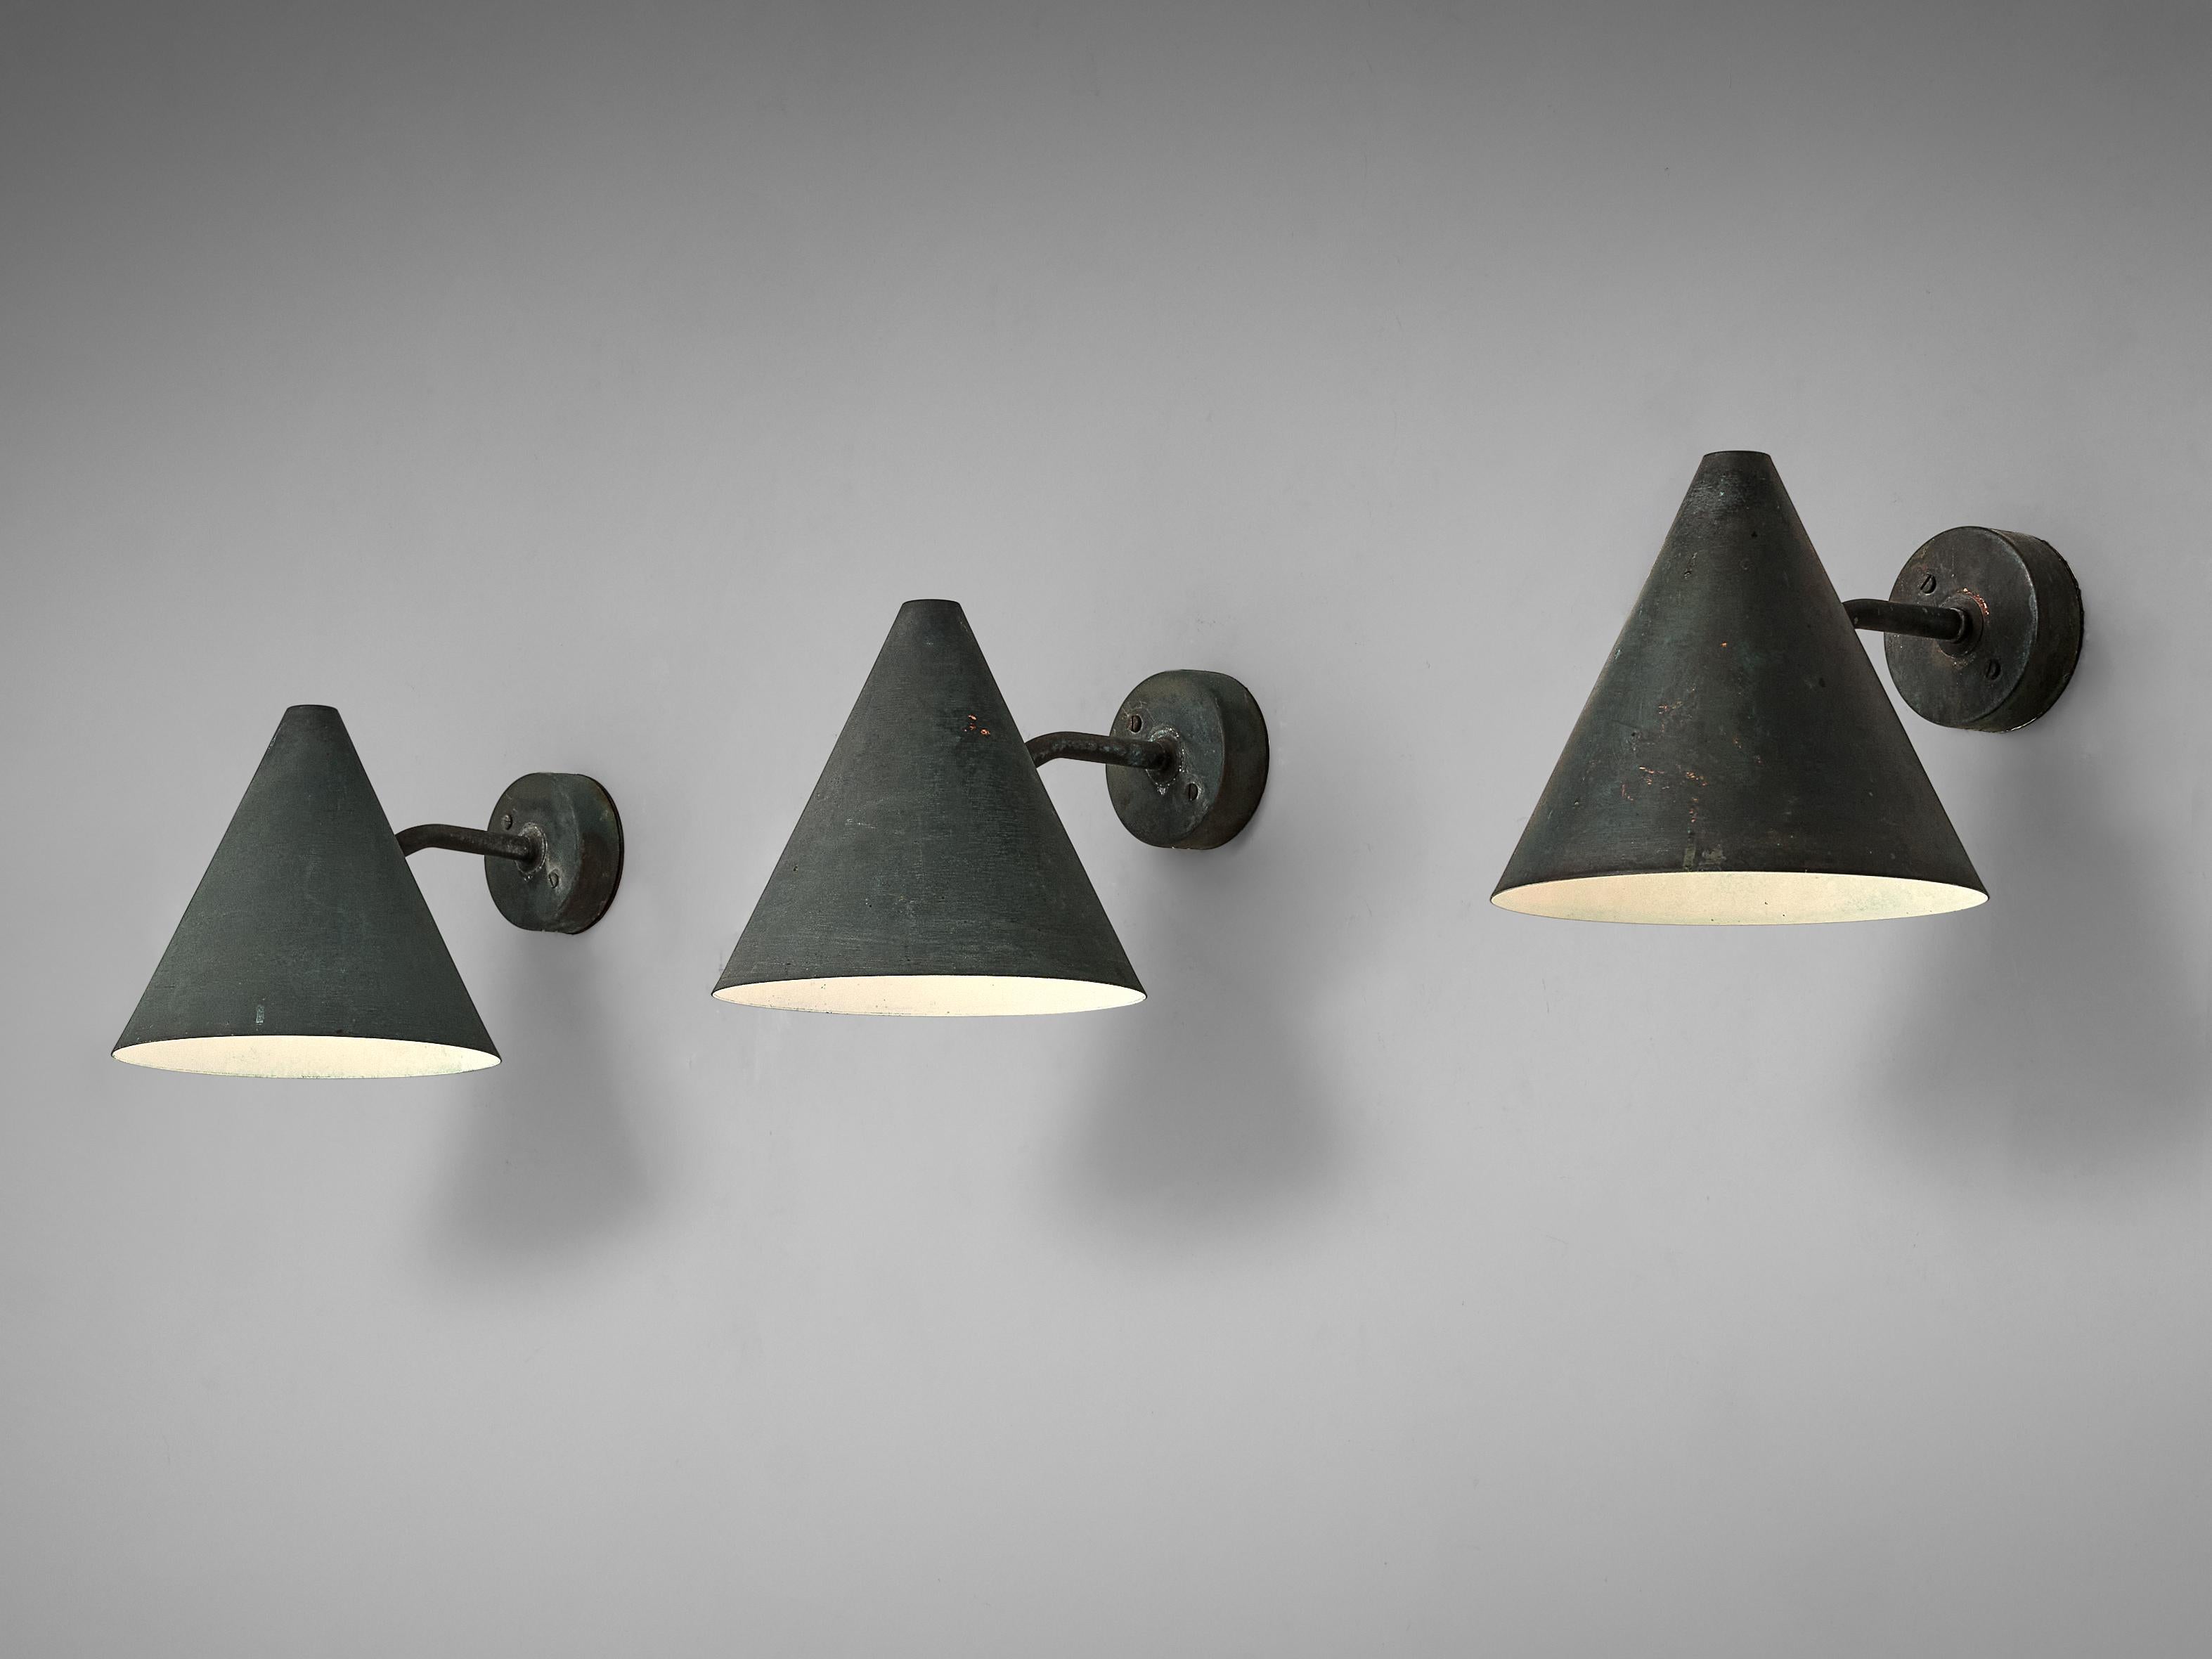 Hans-Agne Jakobsson 'Tratten' Wall Lights in Patinated Copper 1